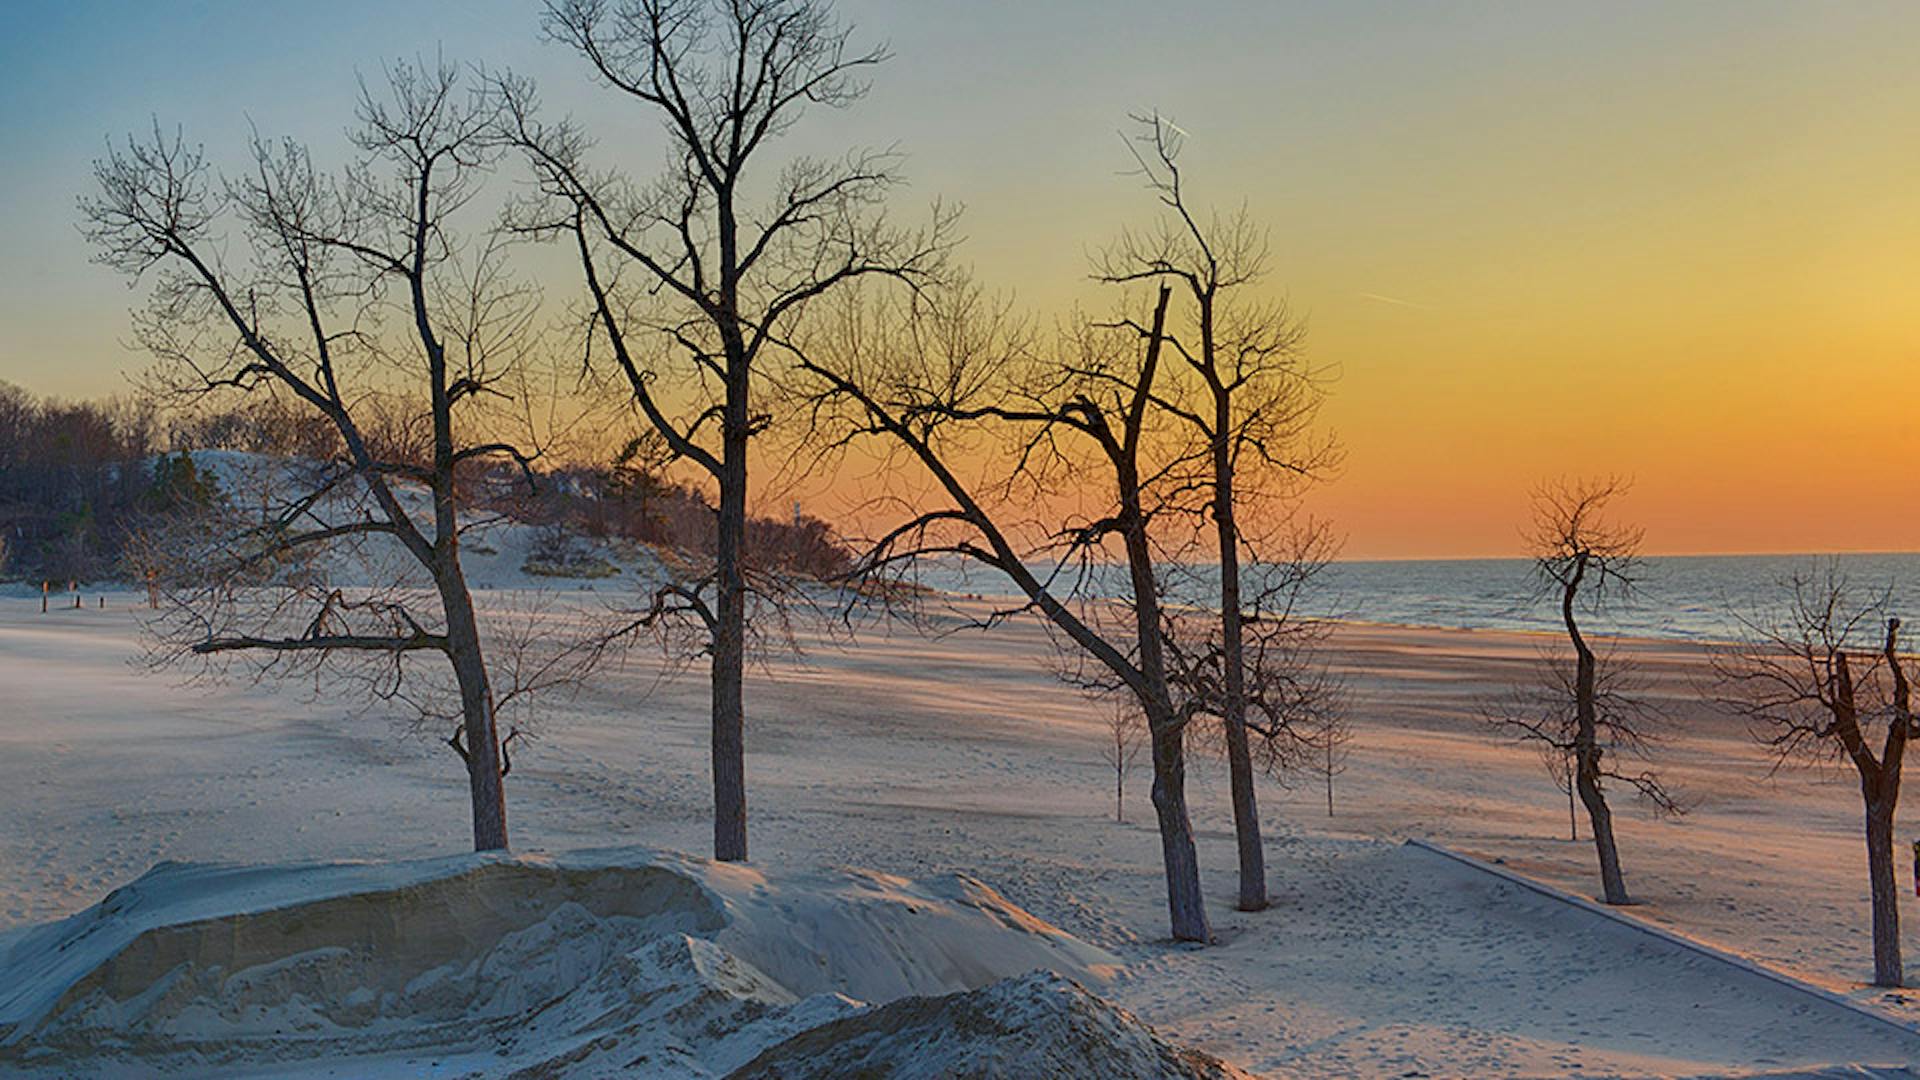 Sunset at Indiana Dunes National Park in winter (photo by iStock)